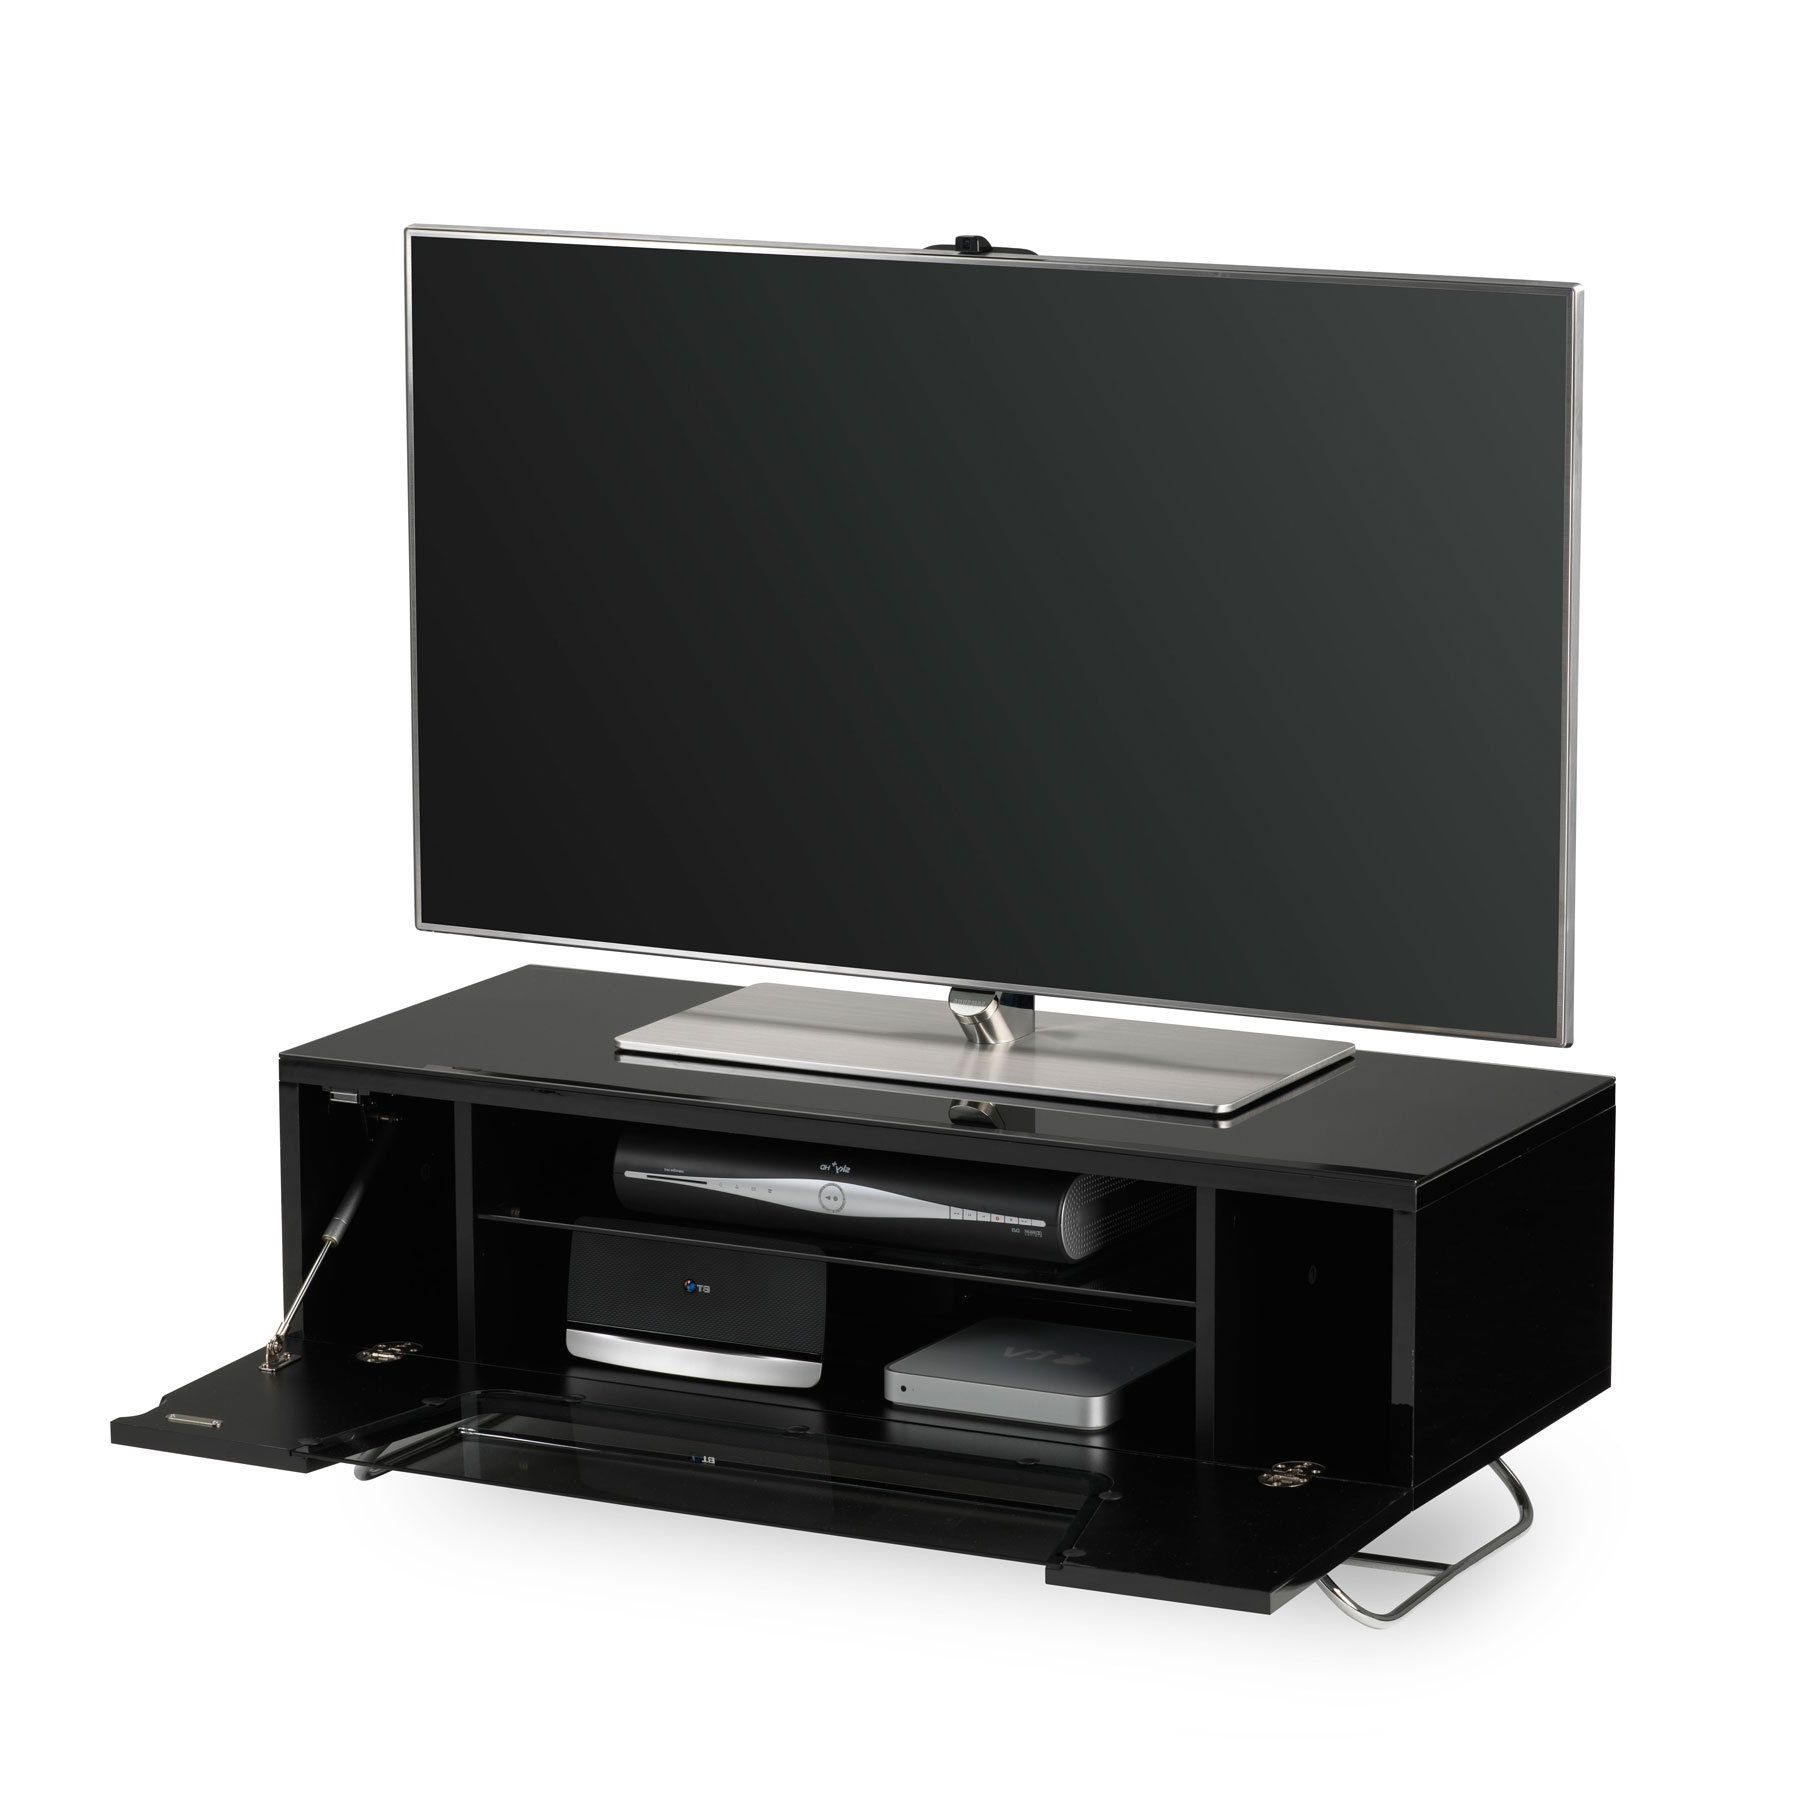 Alphason Chromium 2 100cm Black Tv Stand For Up To 50" Tvs In Mclelland Tv Stands For Tvs Up To 50" (Gallery 14 of 20)